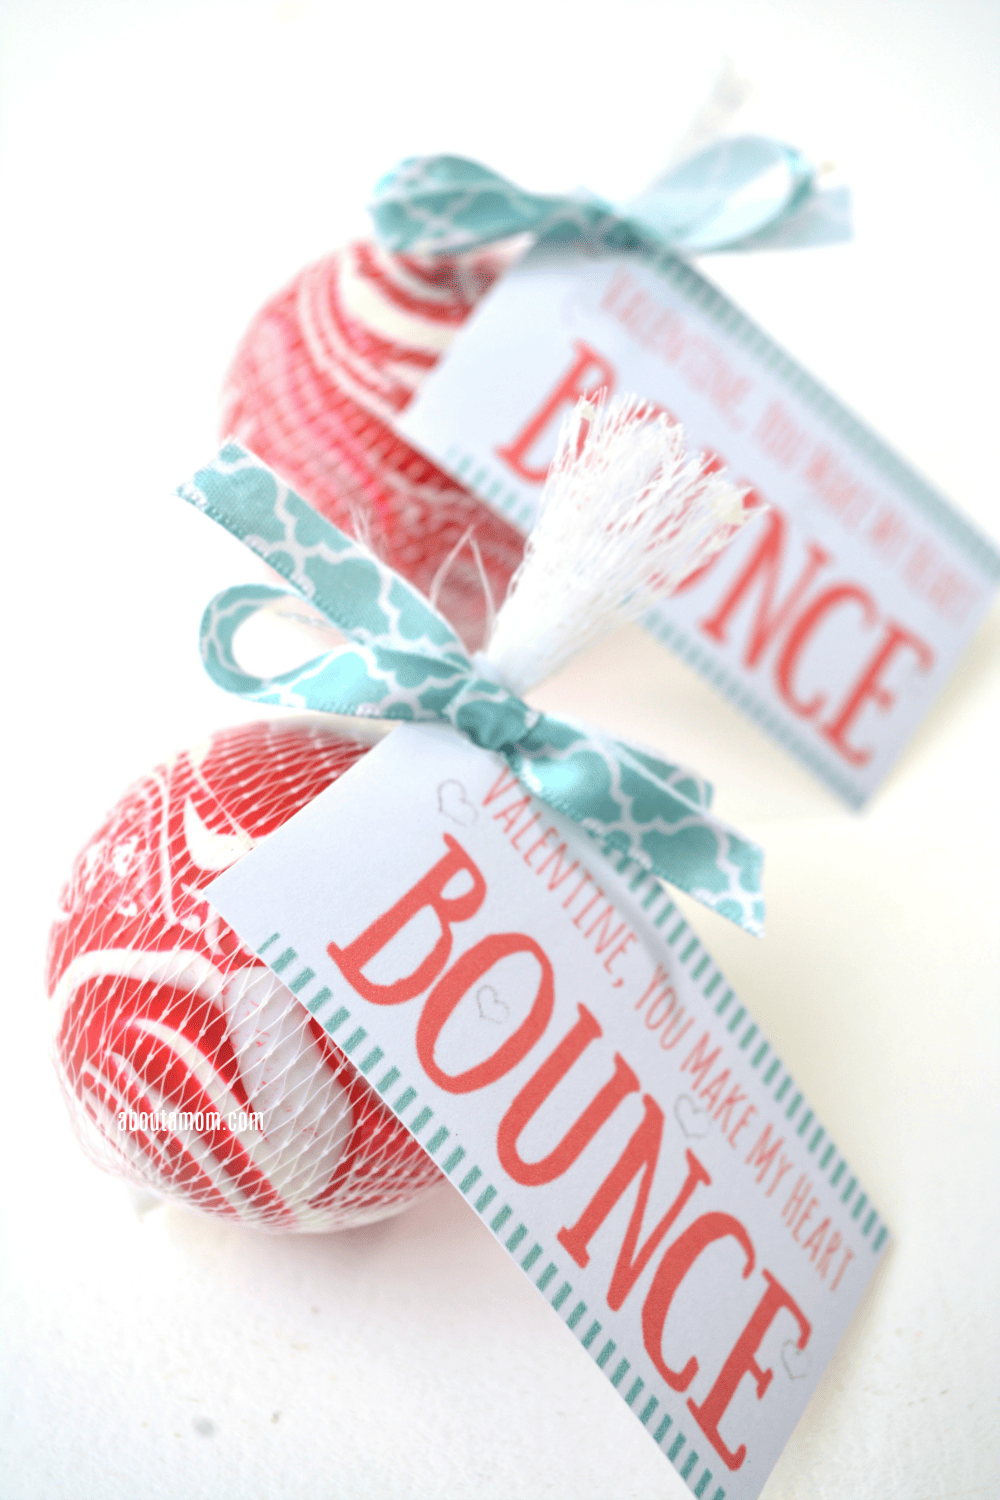 "You Make My Heart Bounce" printable Valentines are so much fun, and kids will enjoy the bouncy ball. They are inexpensive and incredibly simple to make.